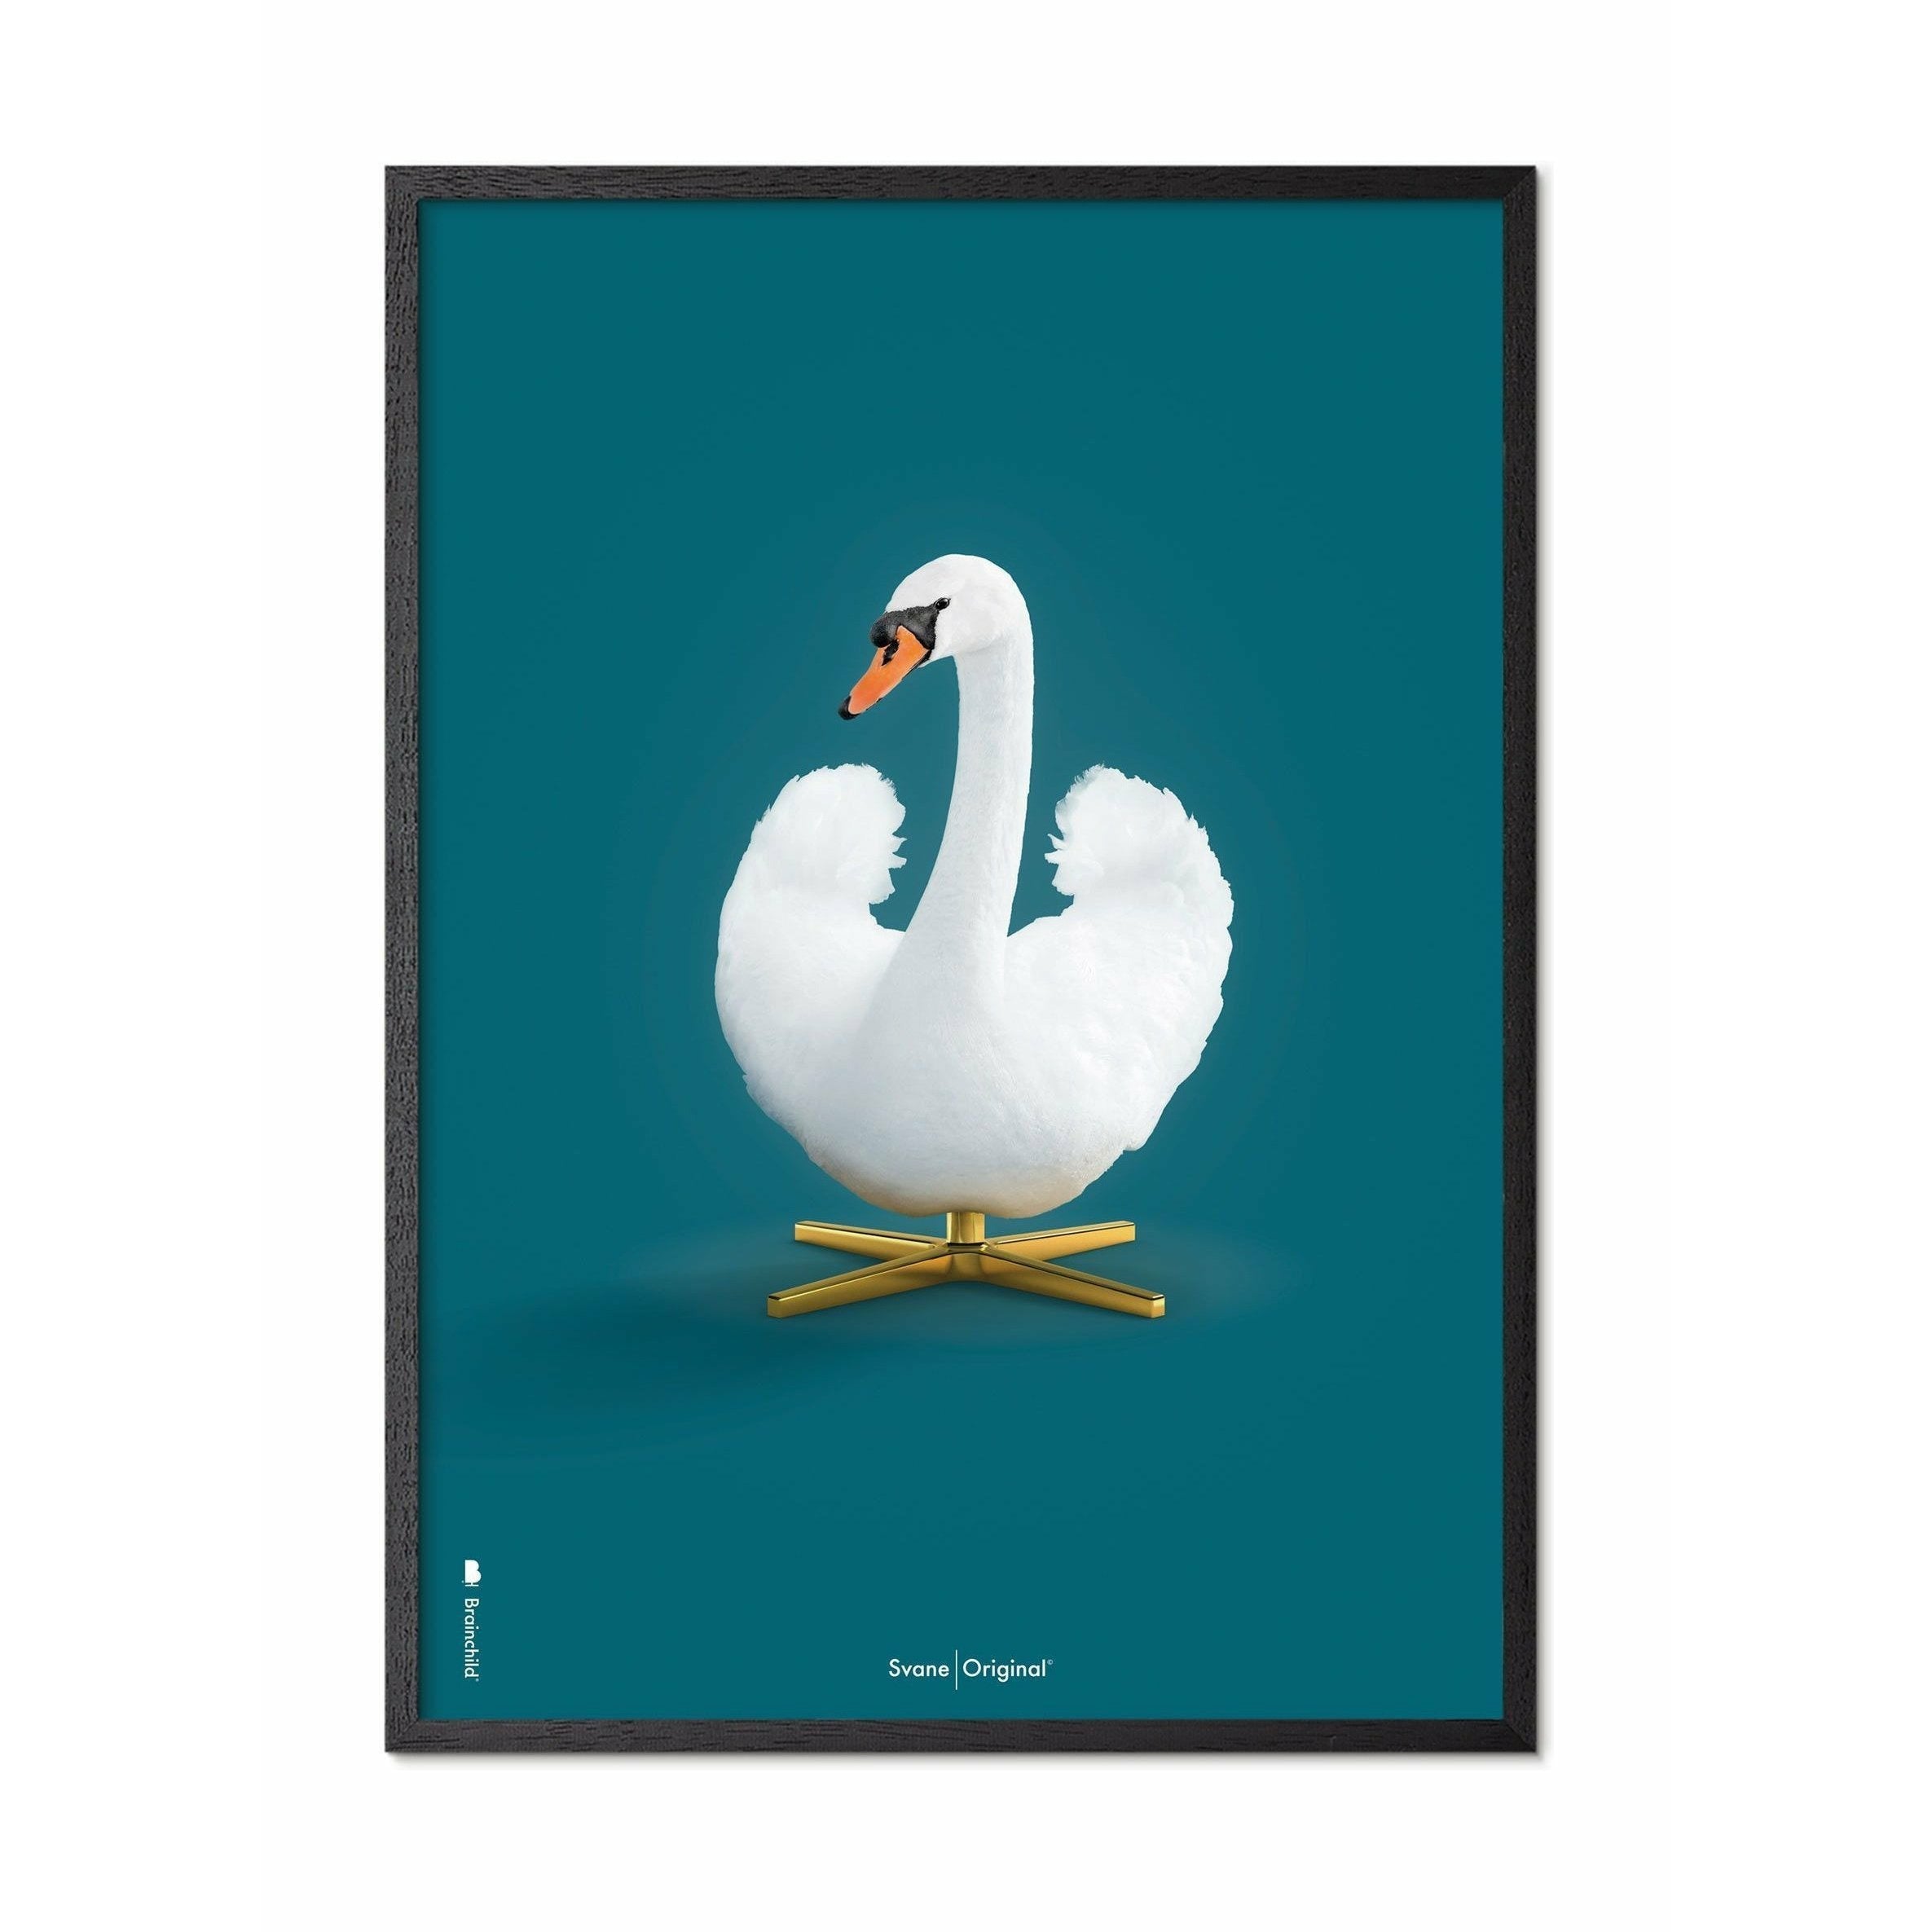 Brainchild Swan Classic Poster, Frame In Black Lacquered Wood 50x70 Cm, Petroleum Blue Background